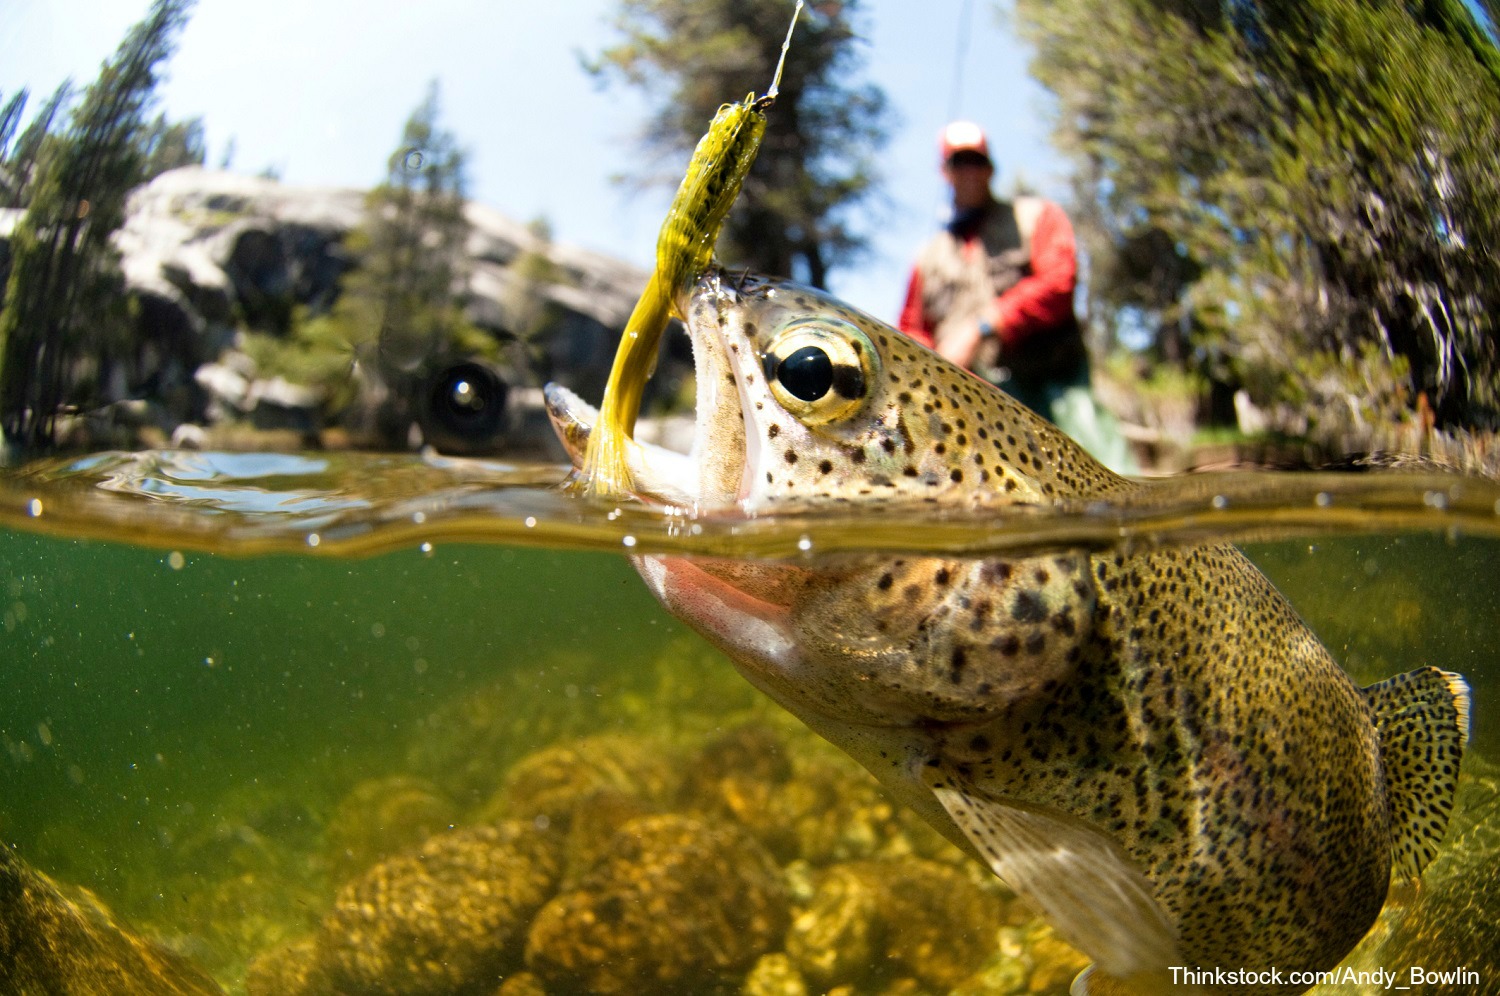 Learn the art of fly fishing through casting practices, outings, and more!